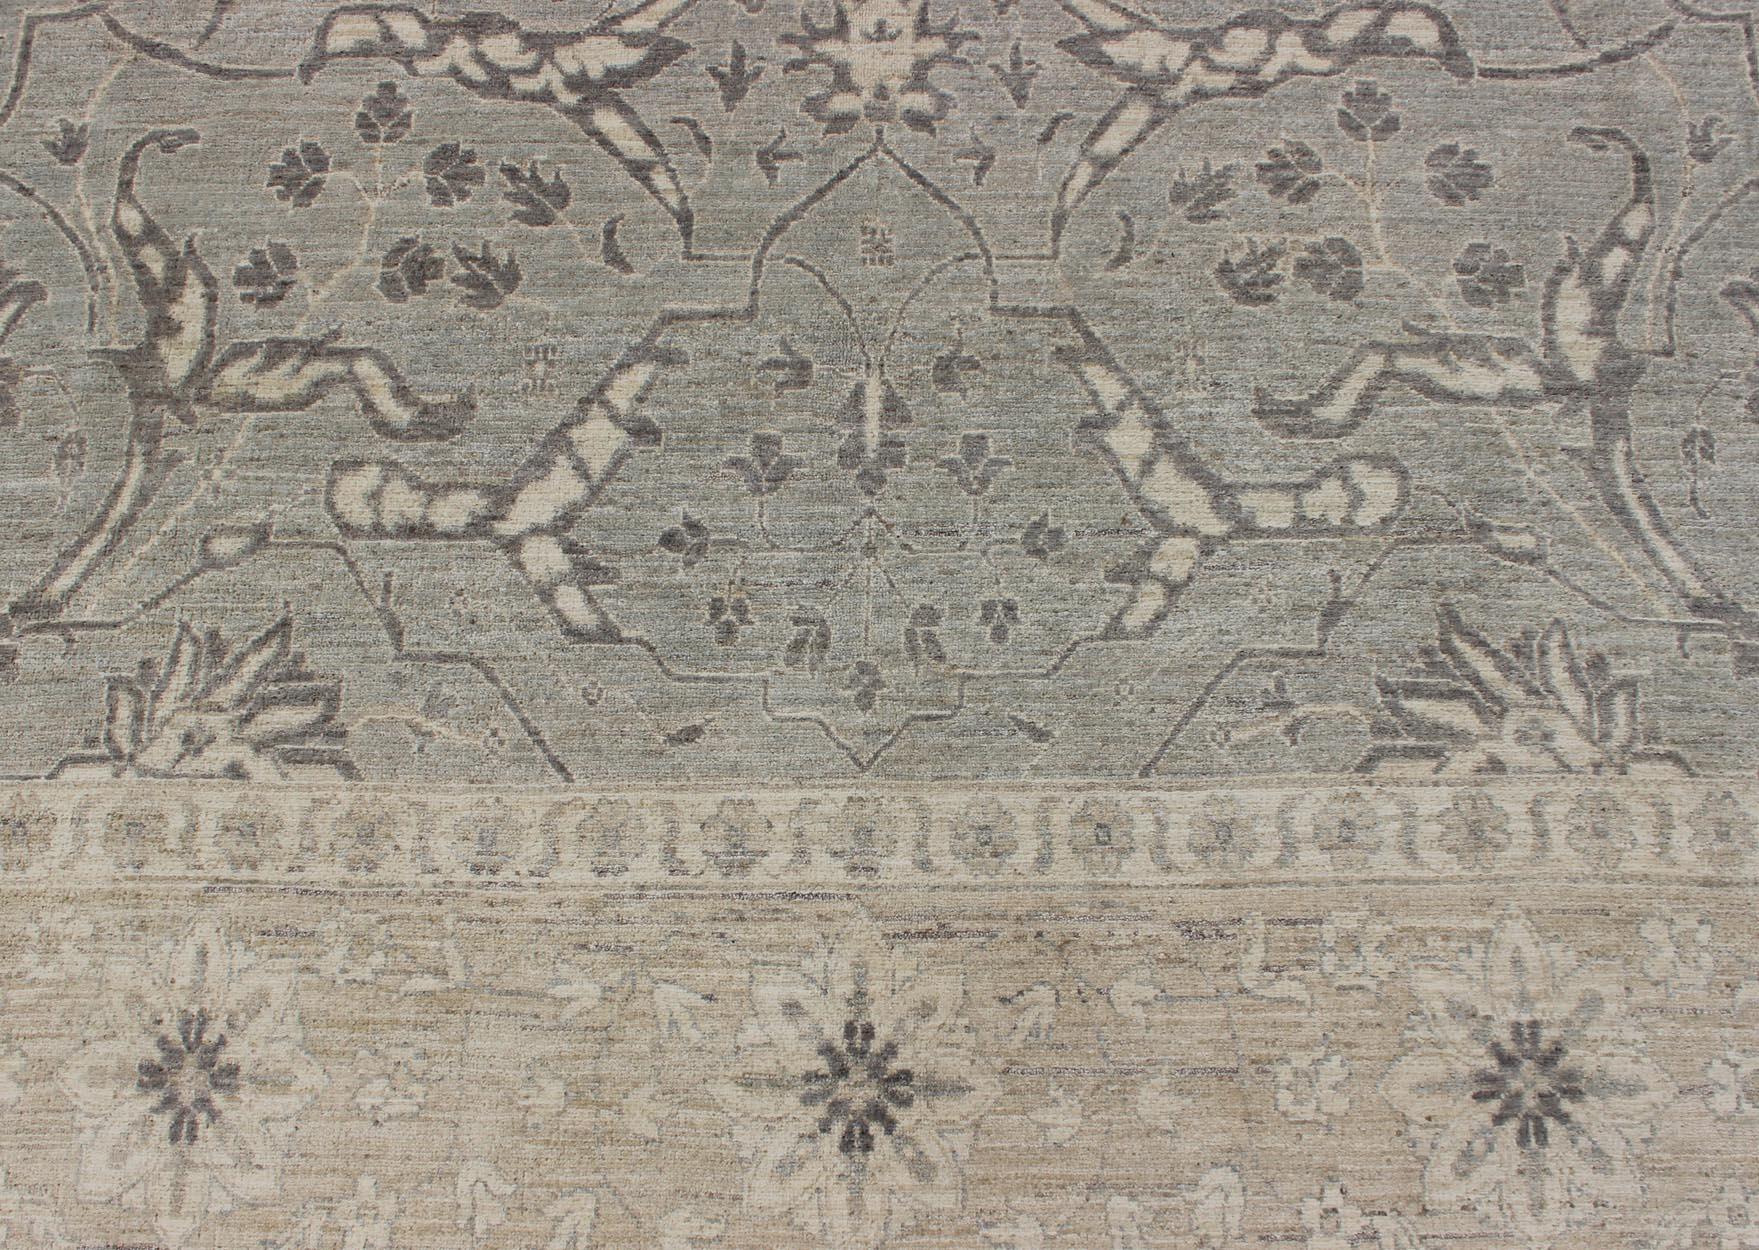 Charming Tabriz Design Rug with All-Over Design in Gray's, Tan, and Cream For Sale 1